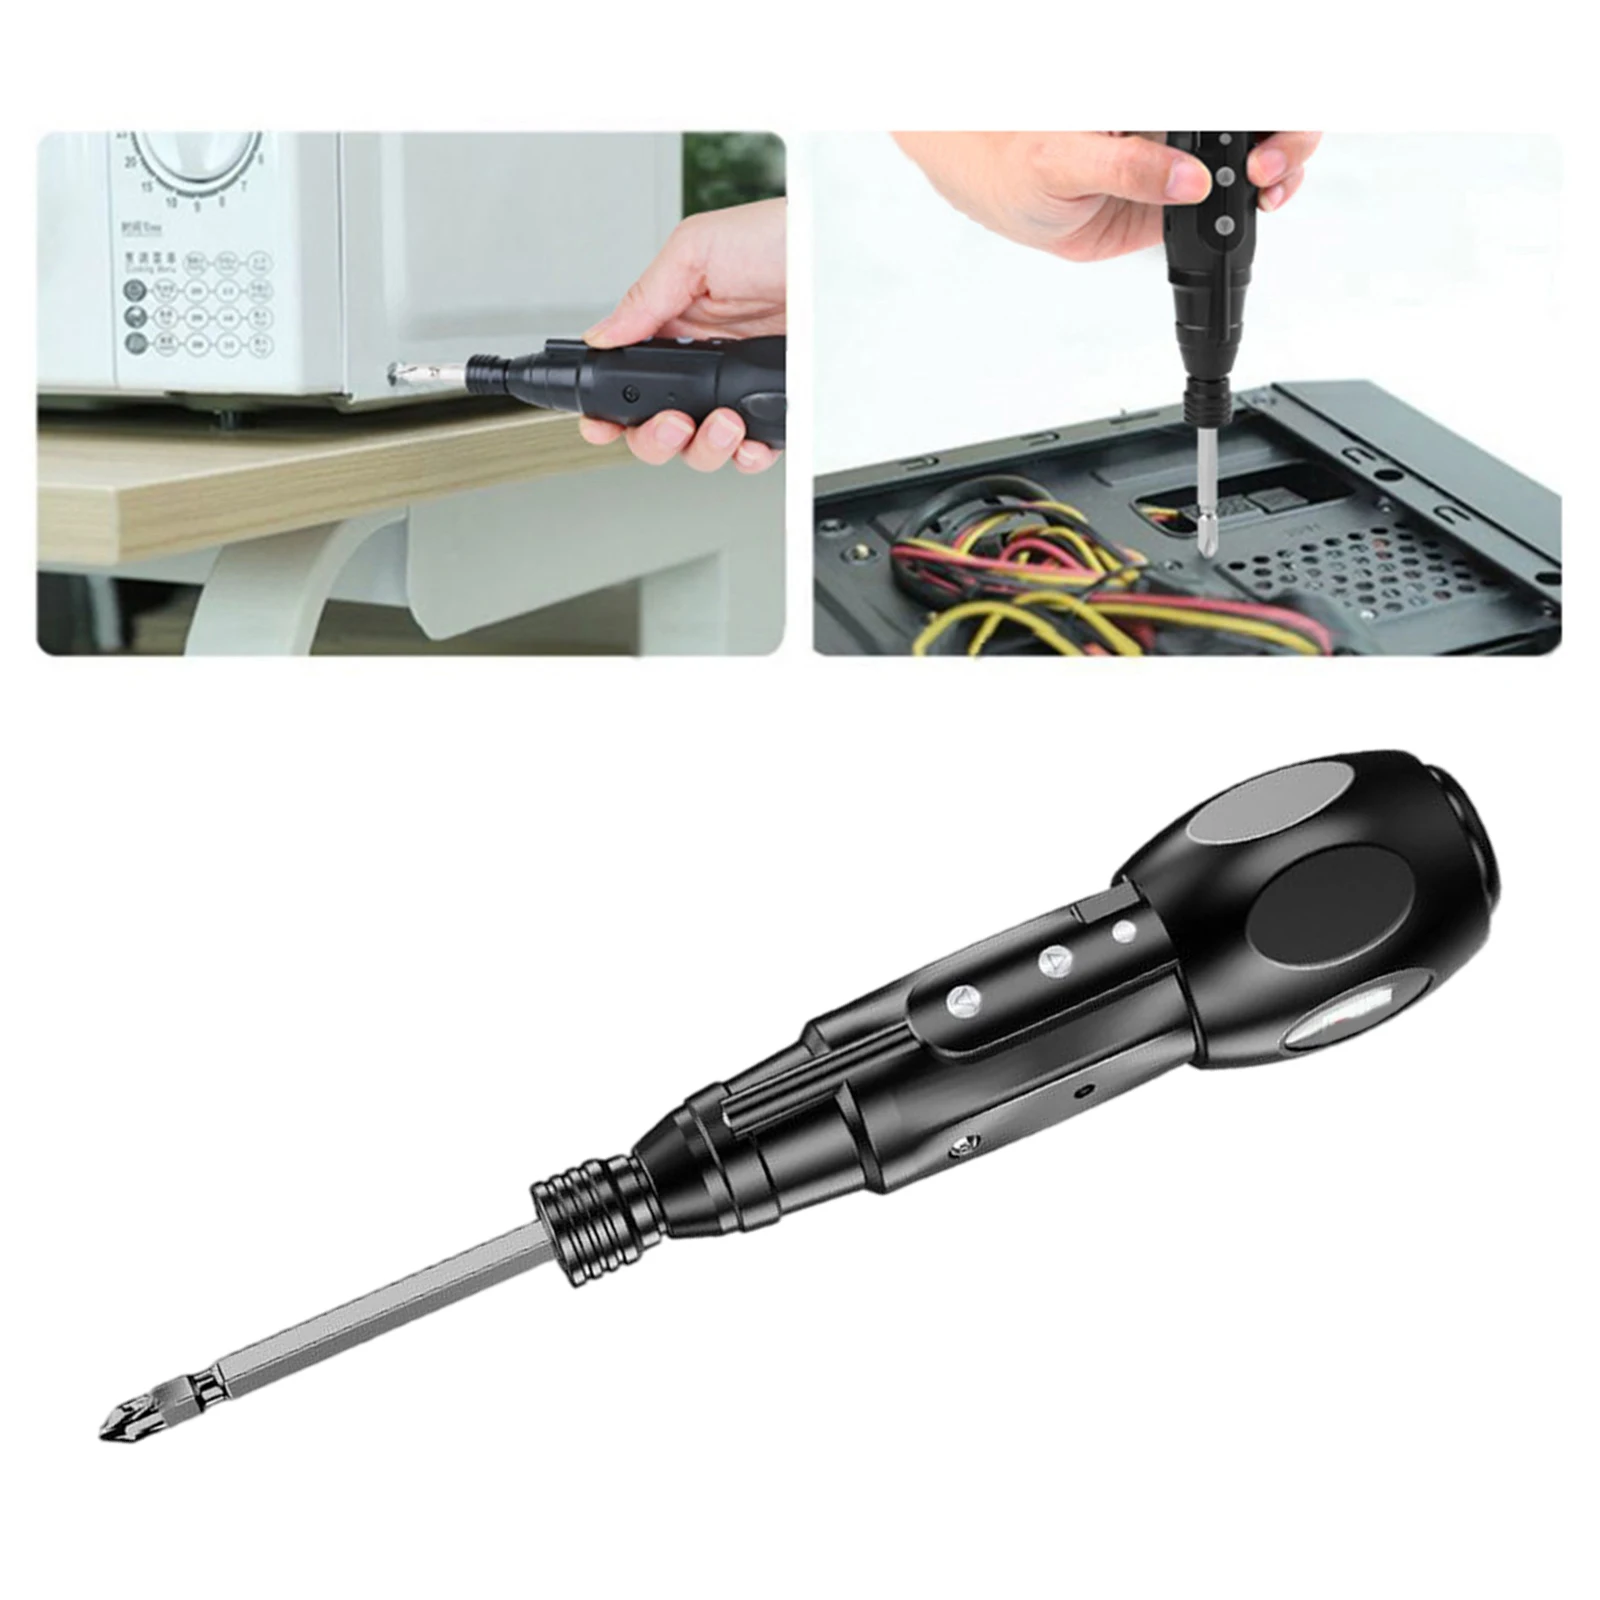 Wireless Electric Screwdriver Repair PC Tools with LED Light Handheld Drill Screwdriver for DIY Project